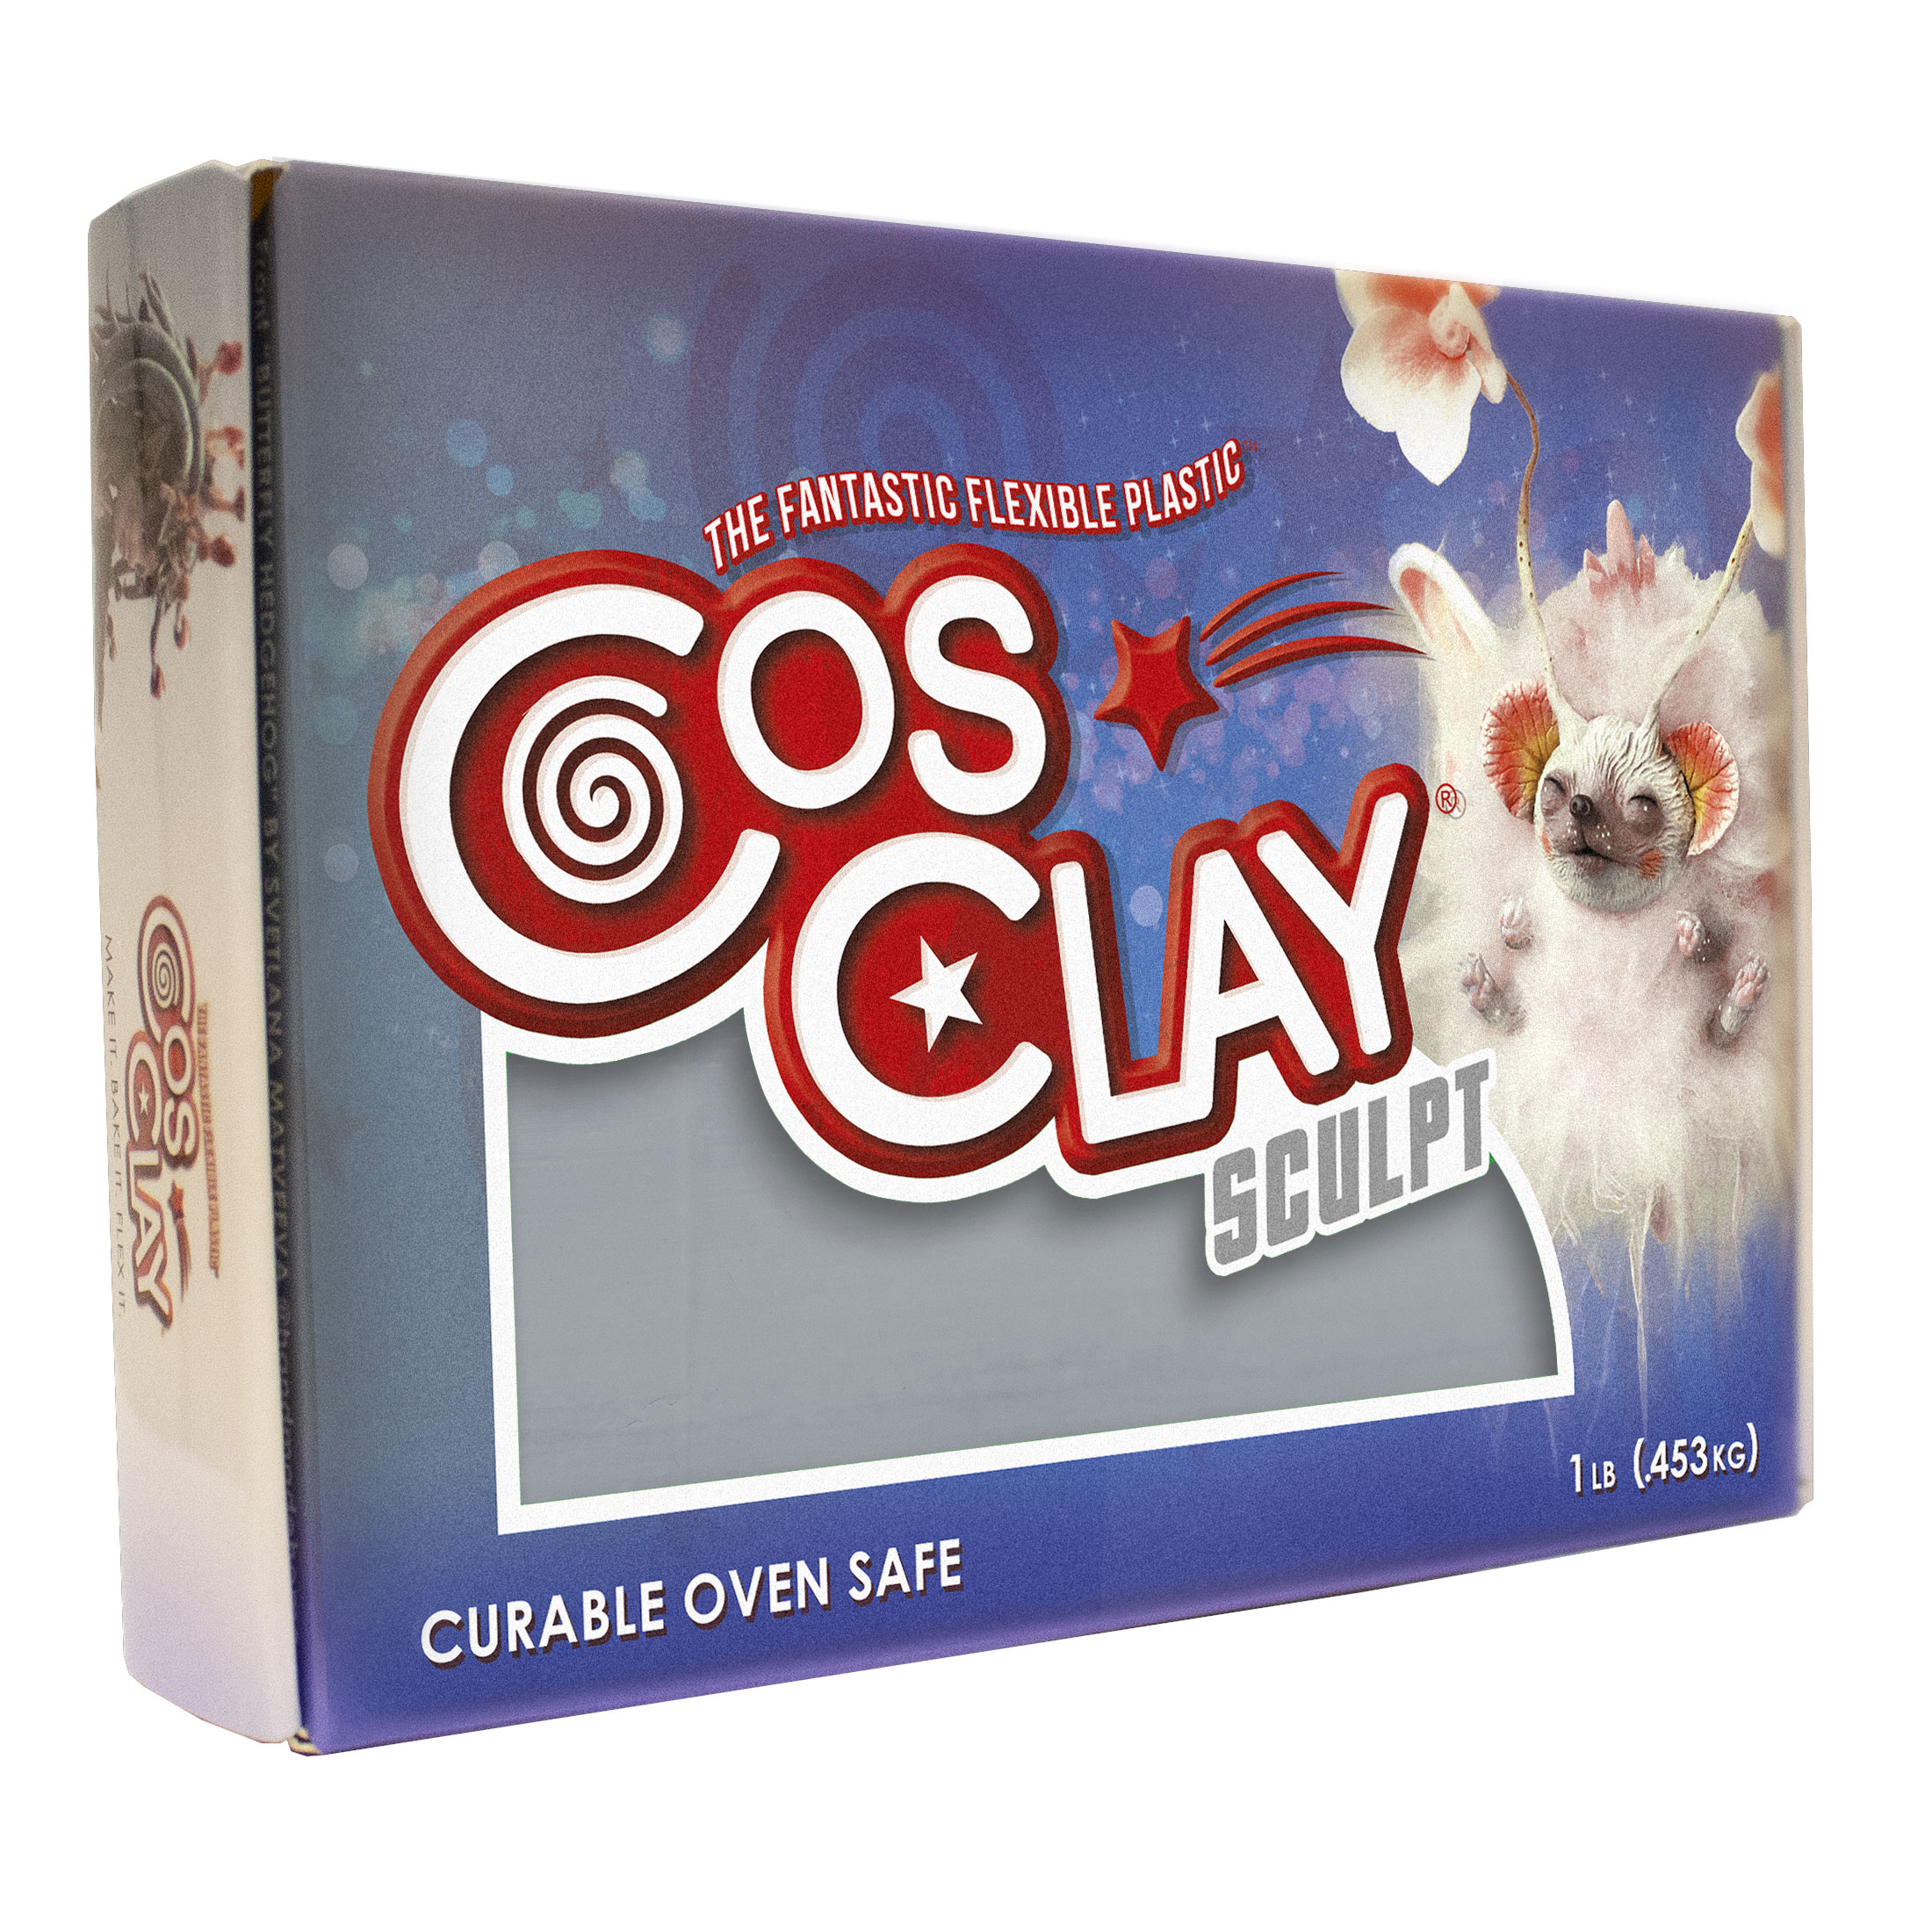 Buy Sculpting Polymer Clay Medium-firm by CosClay - Made in USA